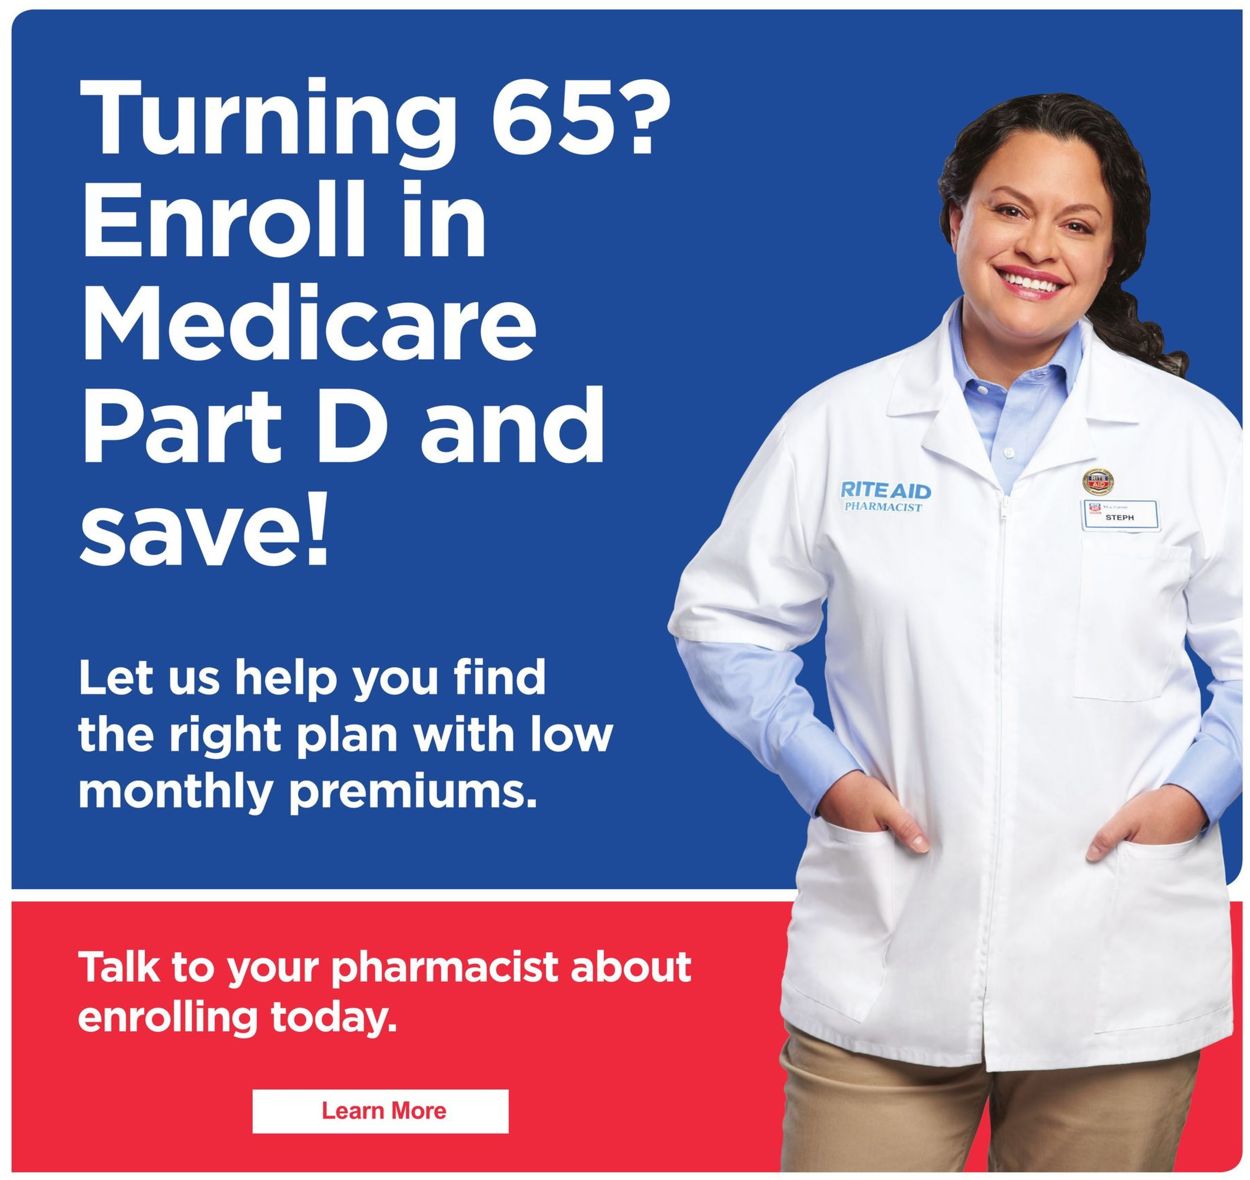 Rite Aid Ad from 03/01/2020